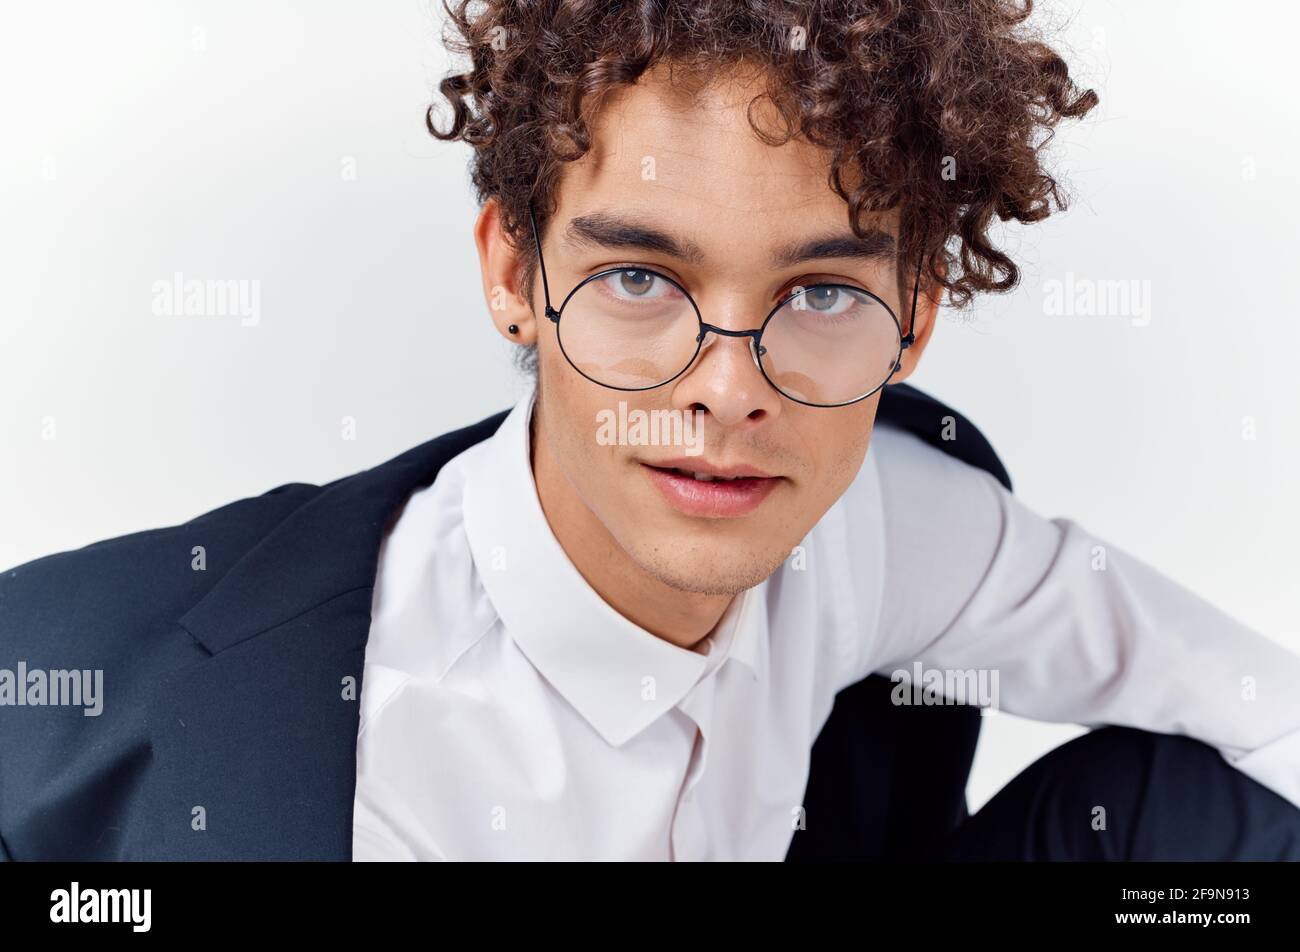 close-up portrait of handsome guy with curly hair wearing glasses and in a  classic suit Stock Photo - Alamy